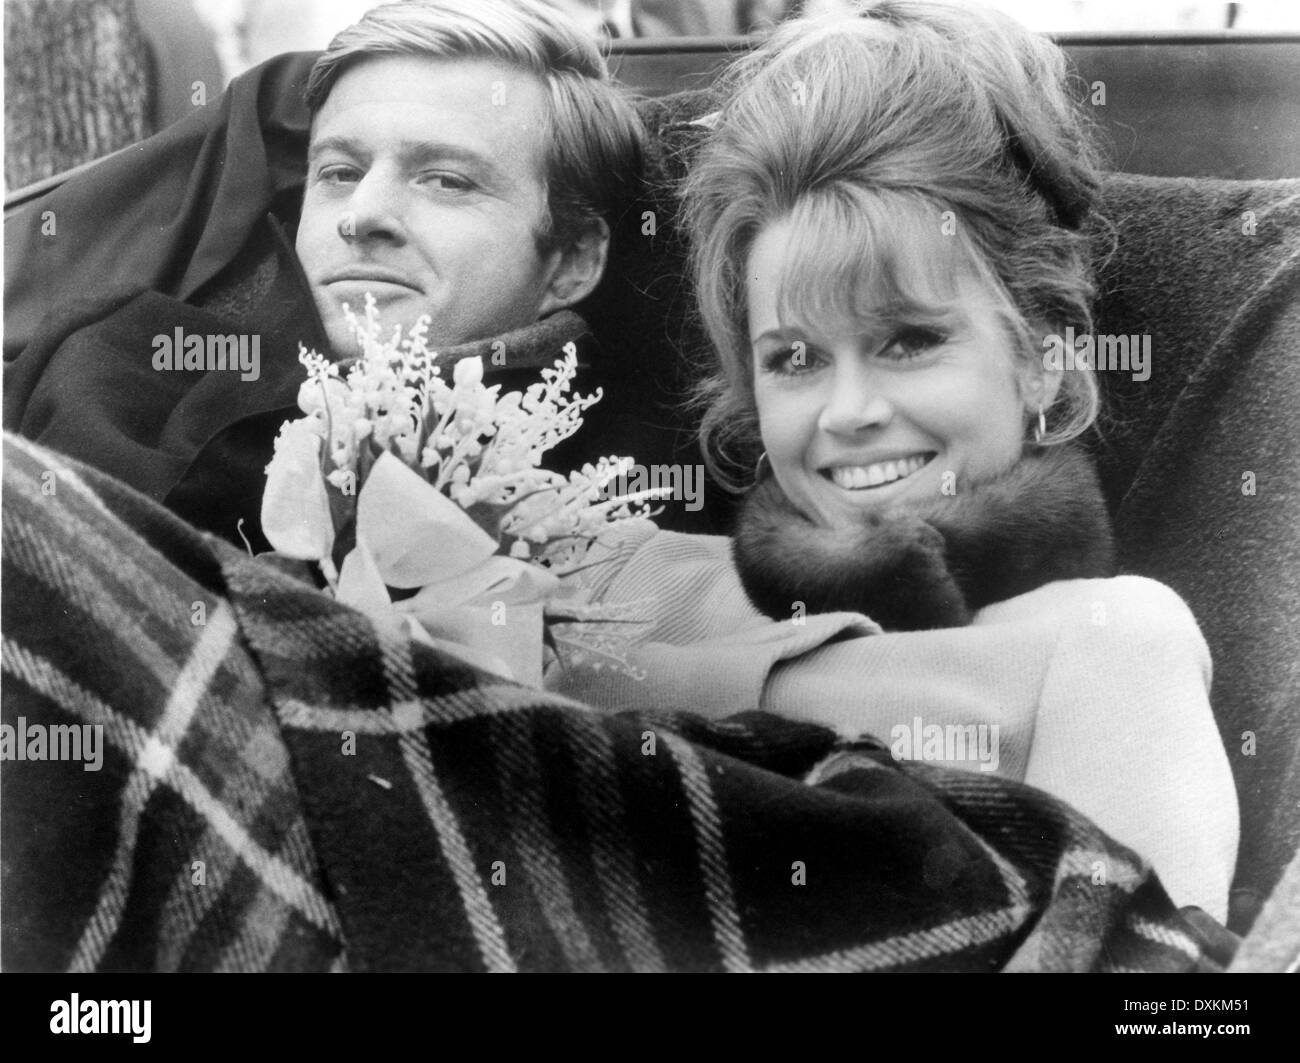 Jane fonda barefoot in the park Black and White Stock Photos & Images ...